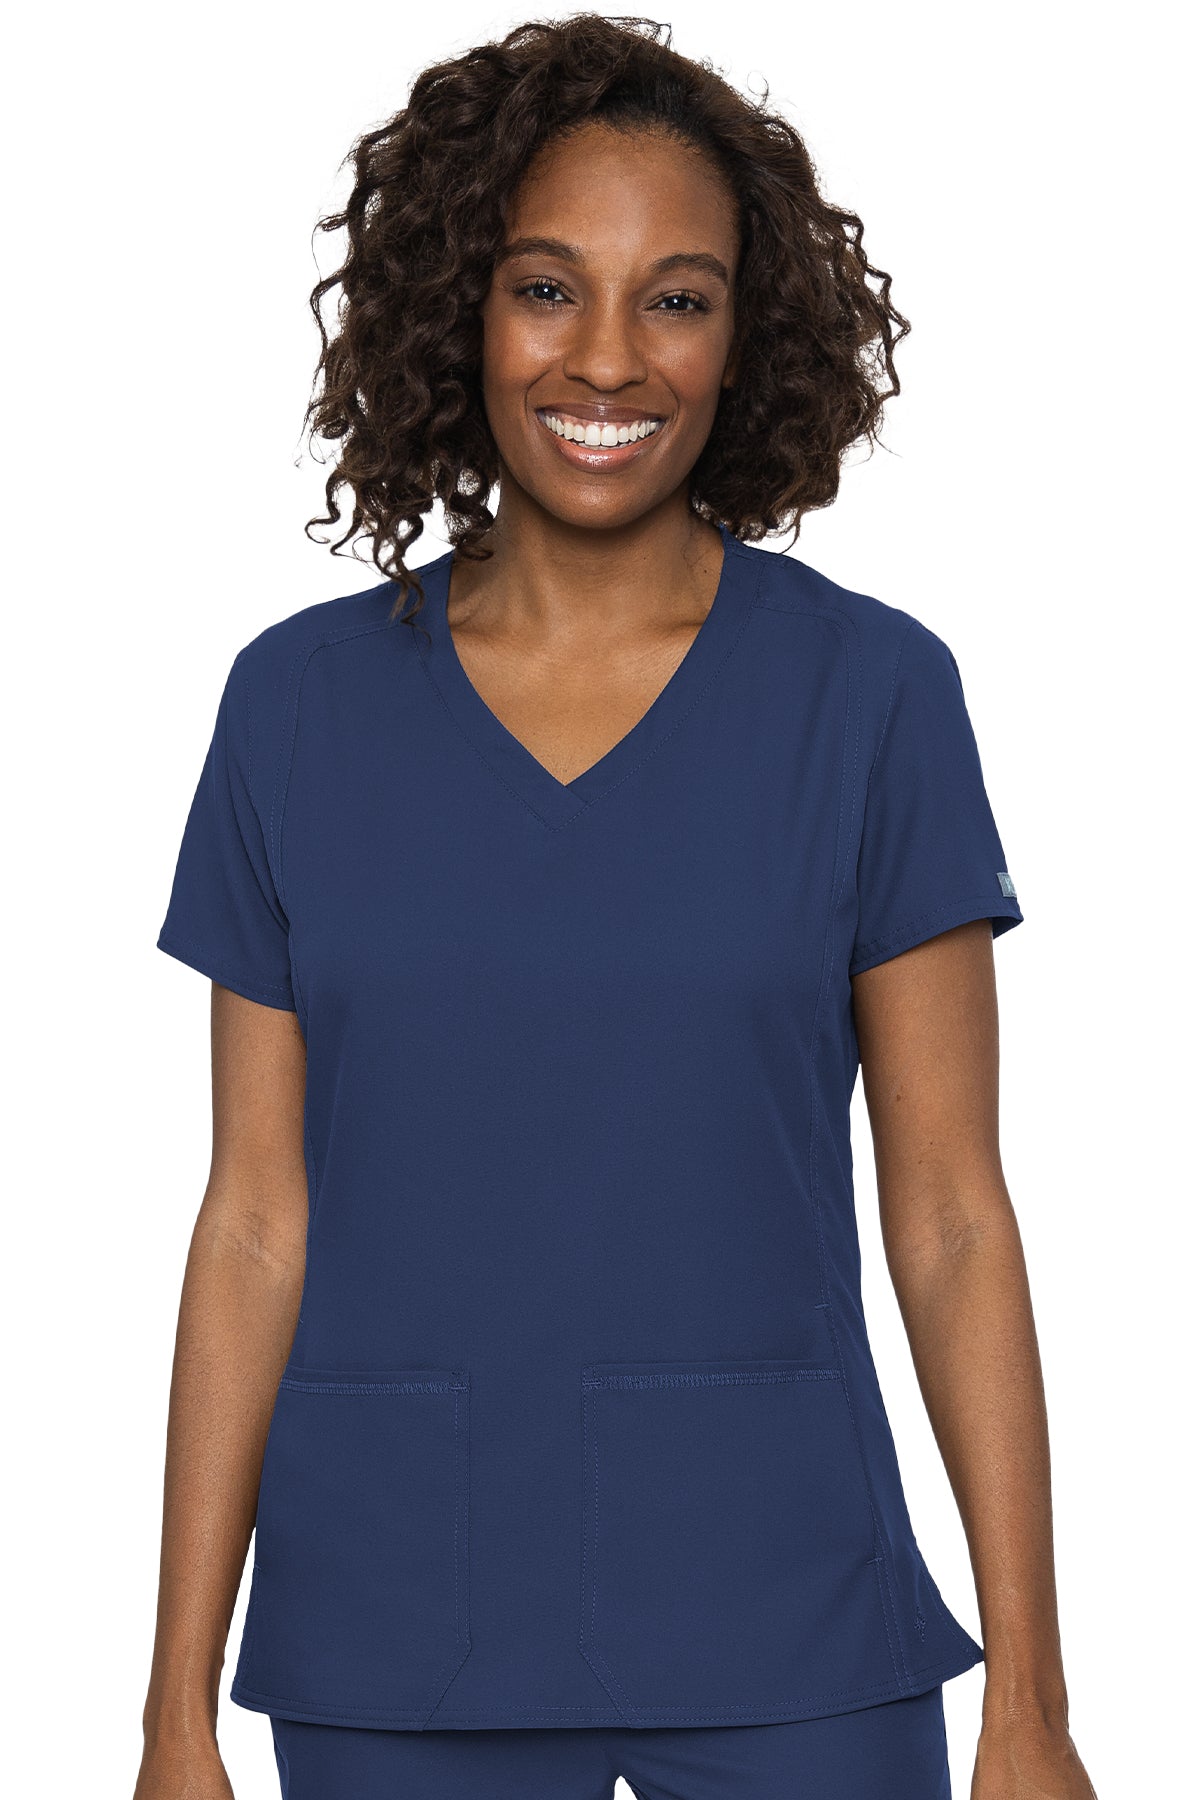 Med Couture Scrub Top Insight Classic V-Neck Side Pocket in Navy at Parker's Clothing and Shoes.